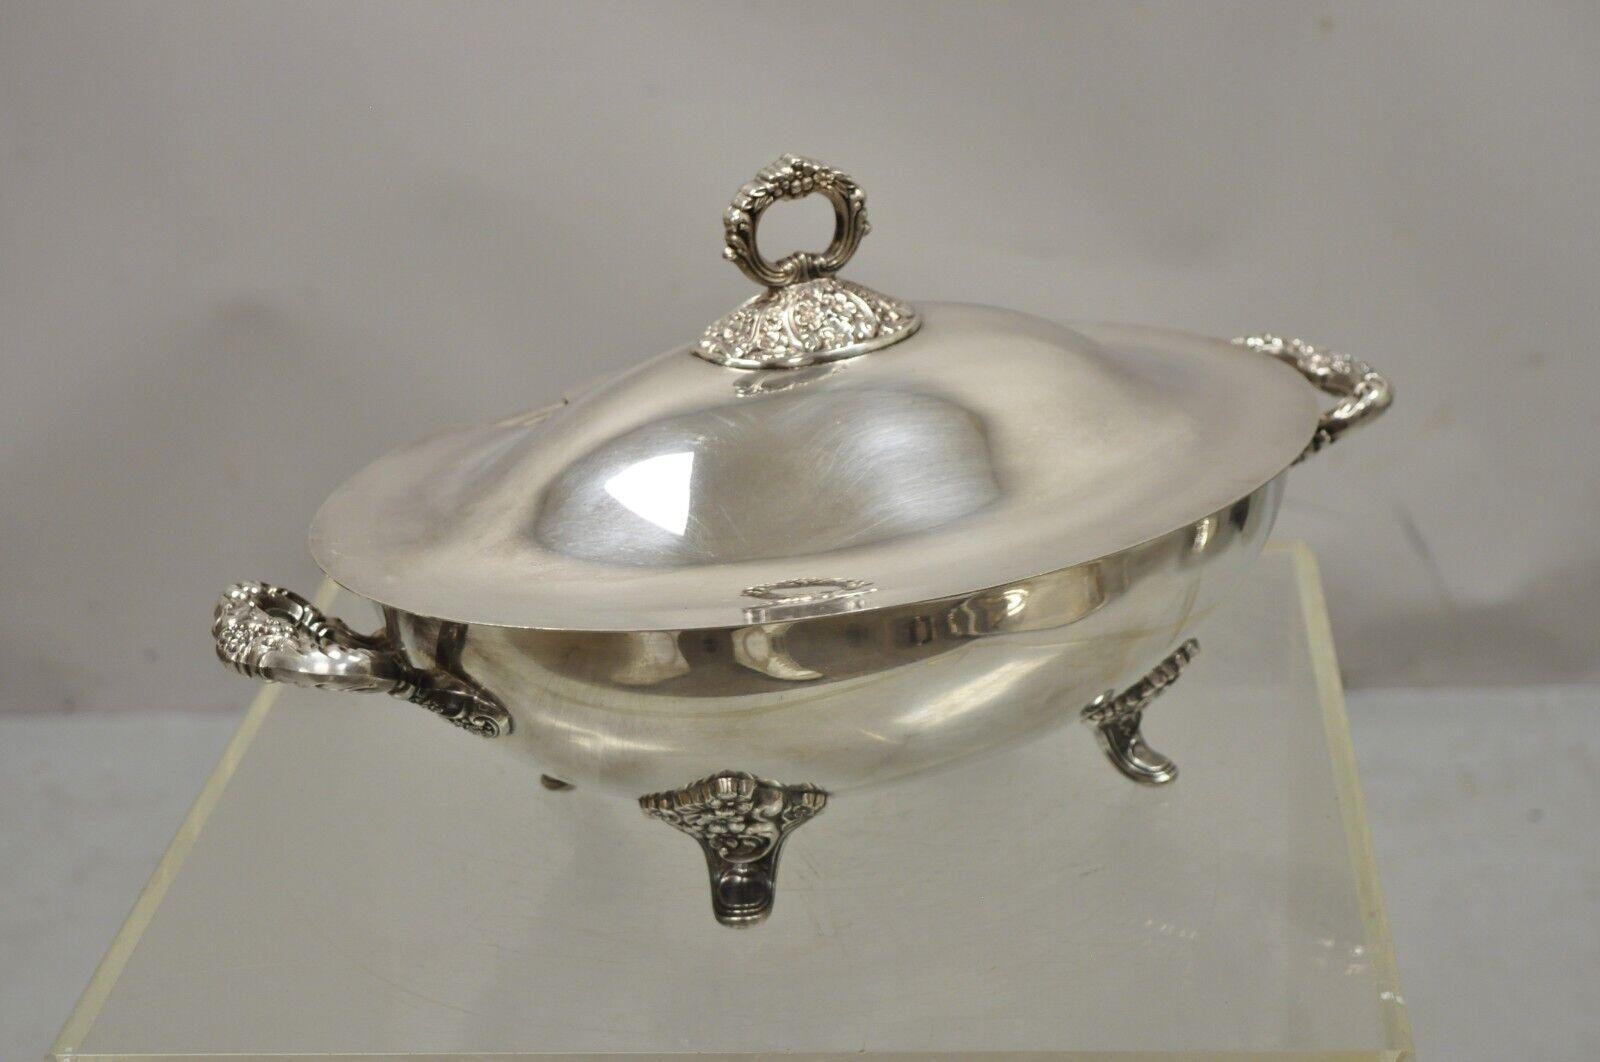 Poole Epca Lancaster Silver Plate Lidded Regency Style Soup Tureen serving bowl. raised on ornate feet, ornate twin handles, lid with spoon cut out, original stamp, very nice vintage item. Circa mid 20th century. Measurements: 9